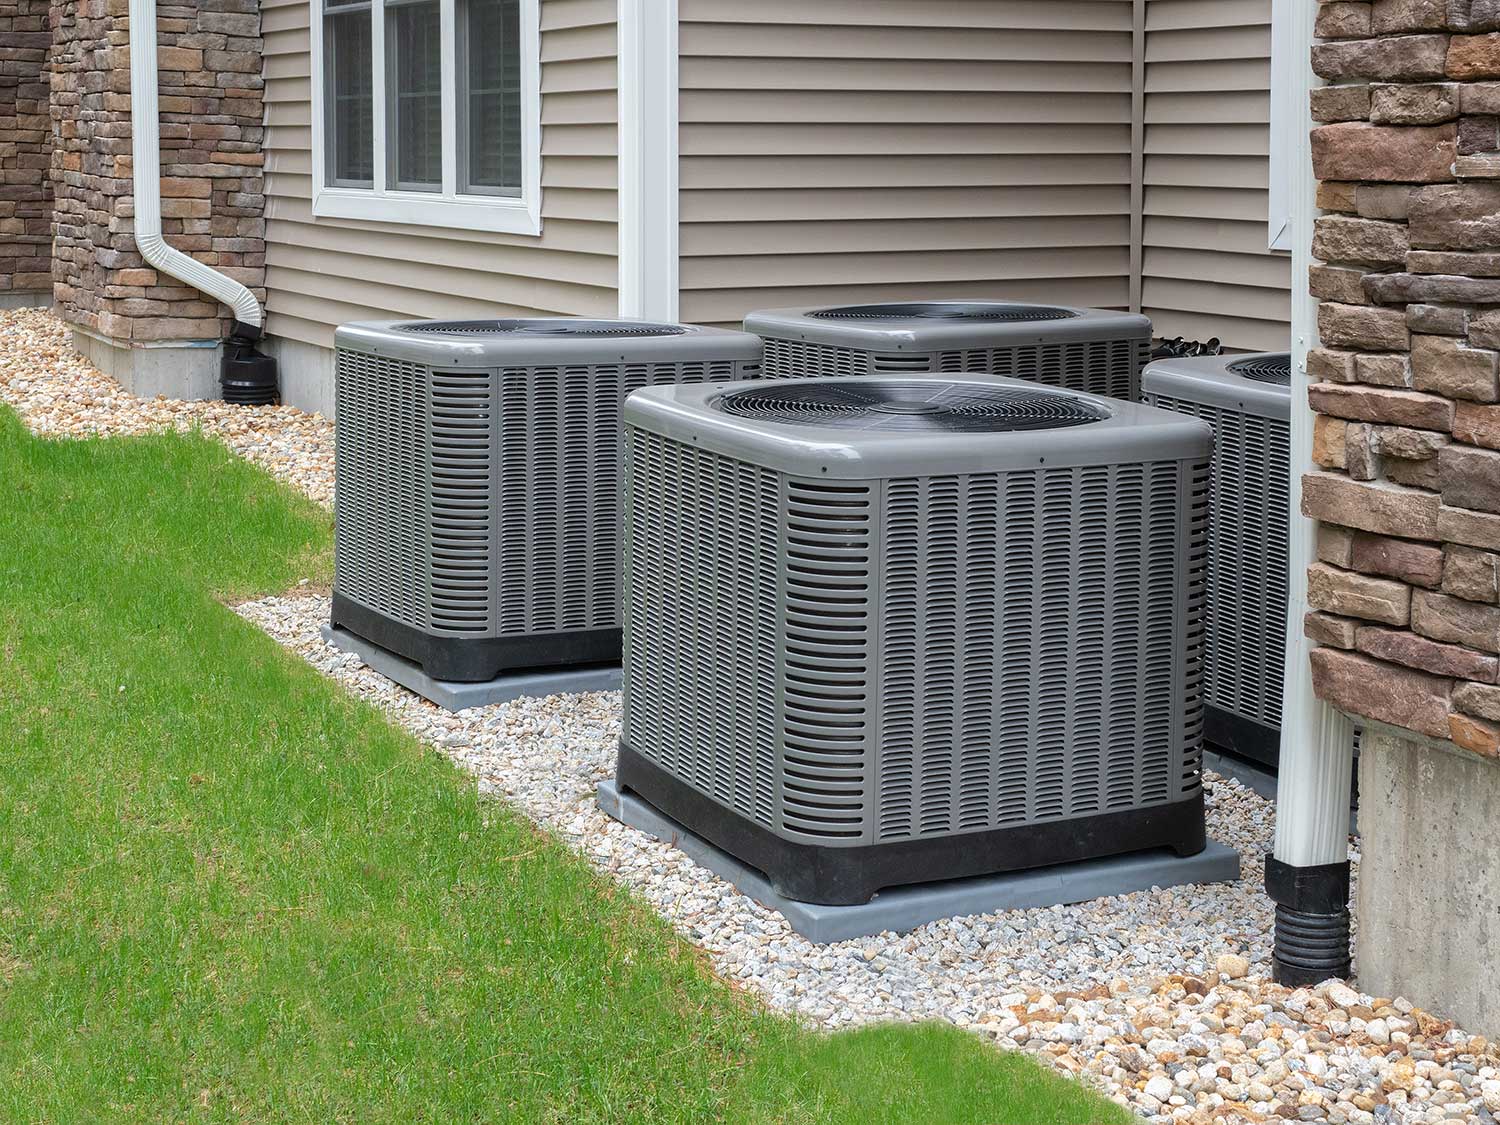 Upgrading Heating and Air Conditioning for summer